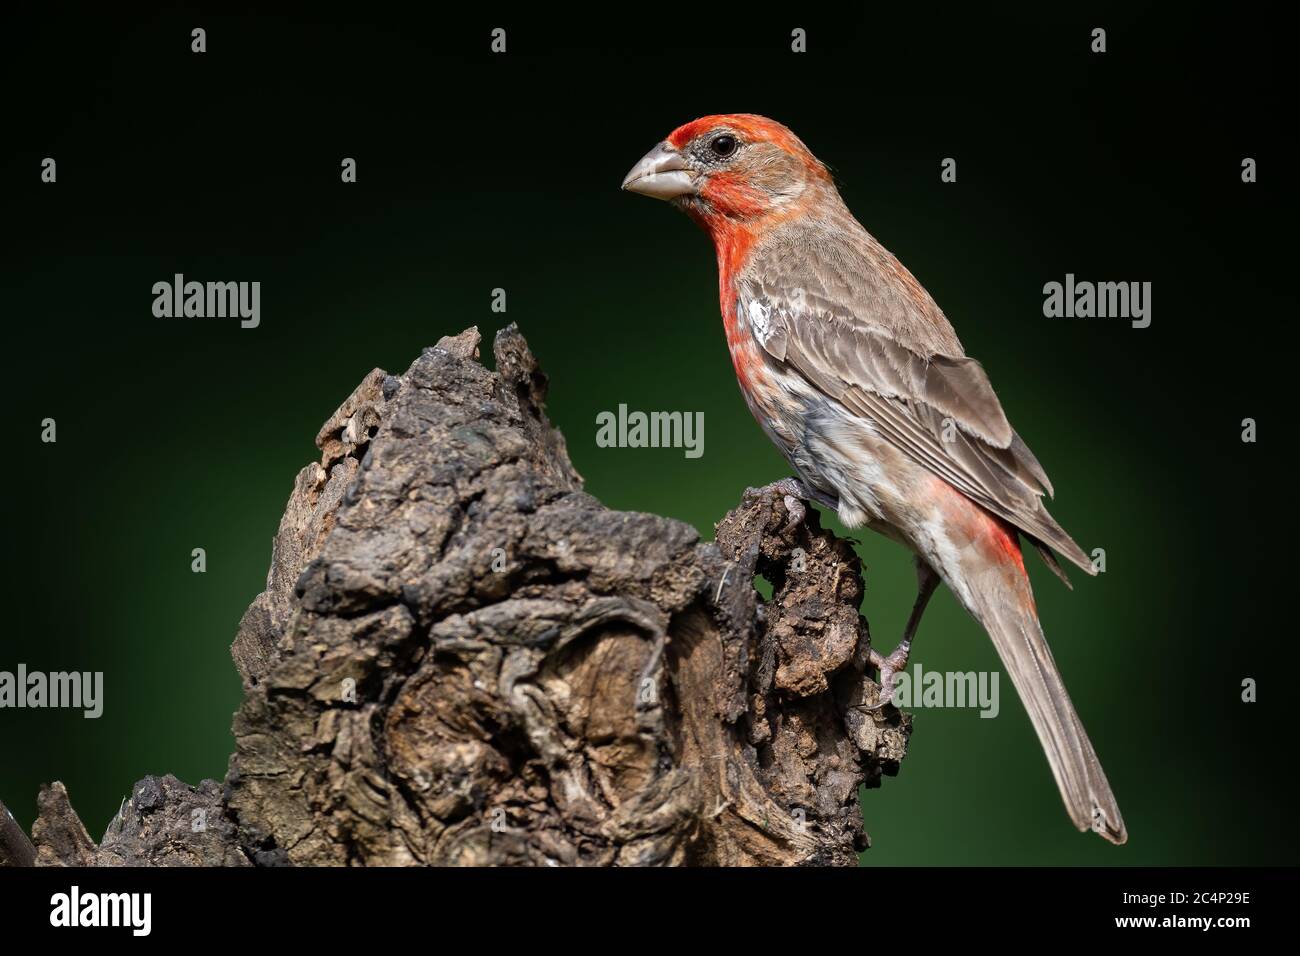 House finch perched on a log Stock Photo